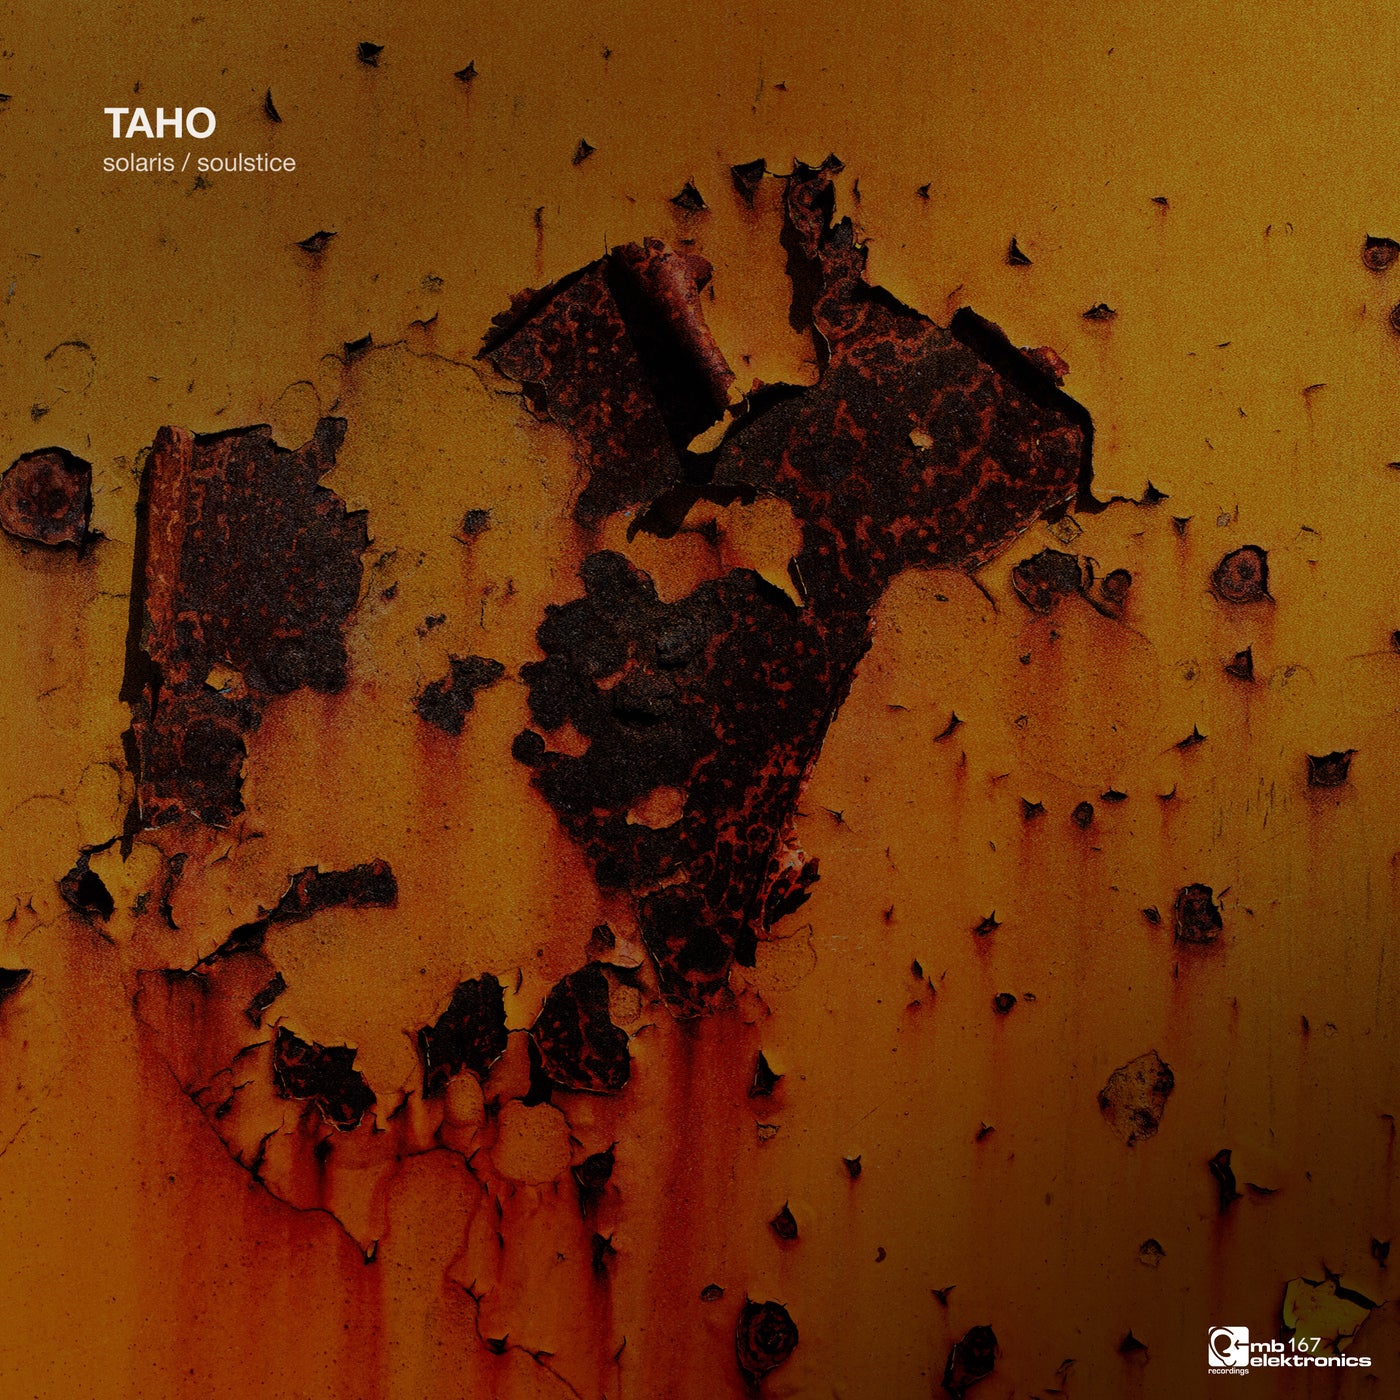 image cover: Taho - Soulstice EP / MBE167